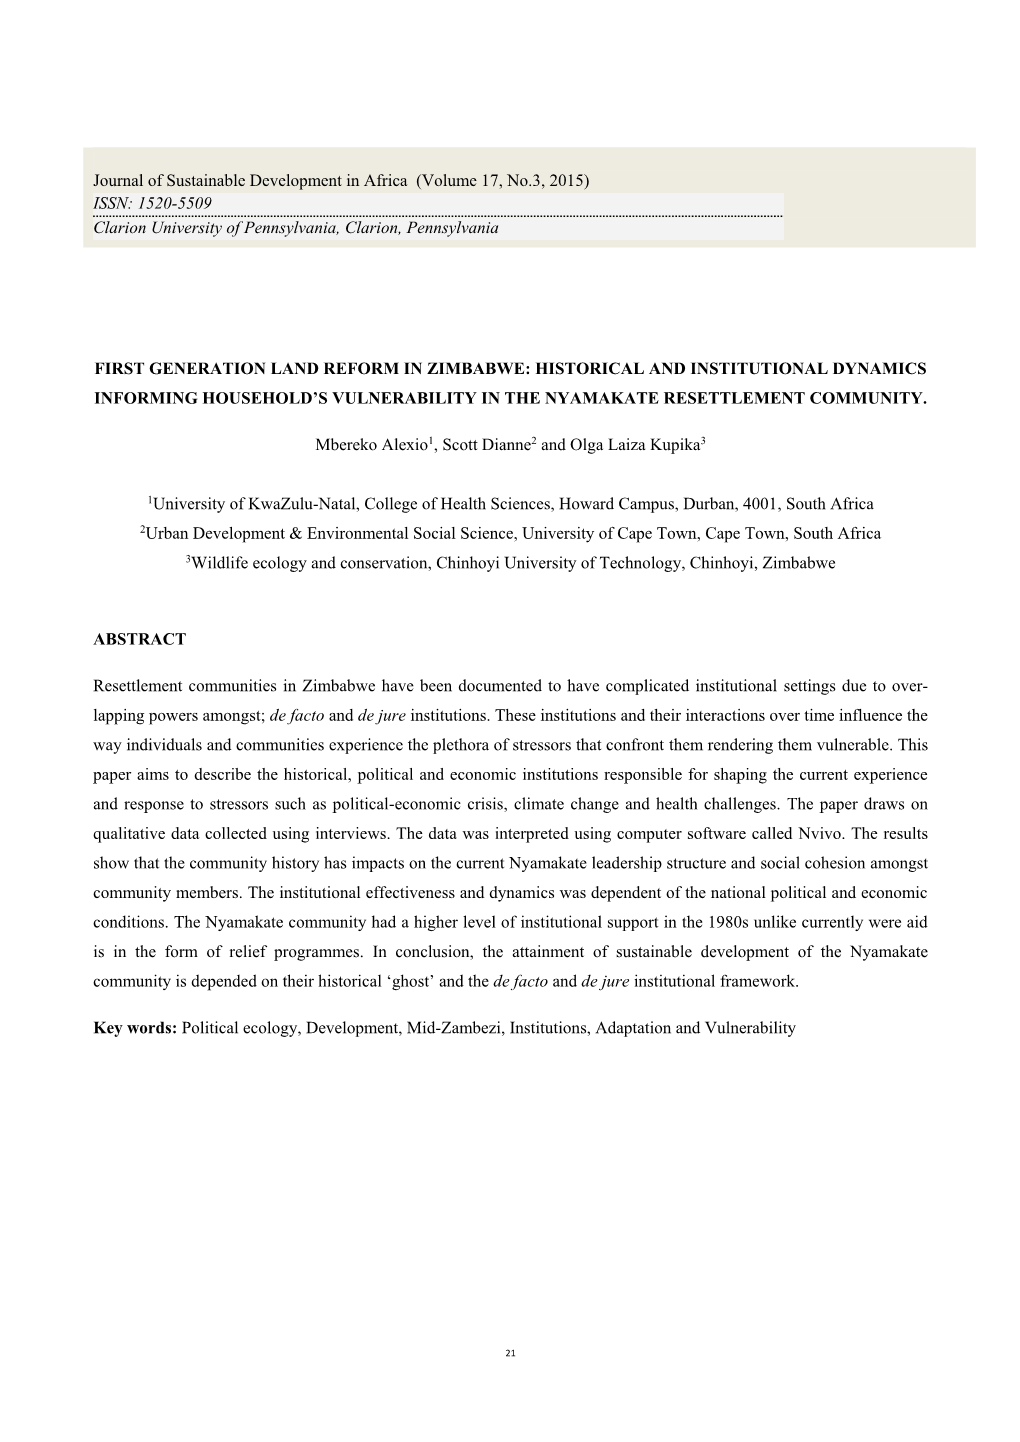 First Generation Land Reform in Zimbabwe: Historical and Institutional Dynamics Informing Household’S Vulnerability in the Nyamakate Resettlement Community